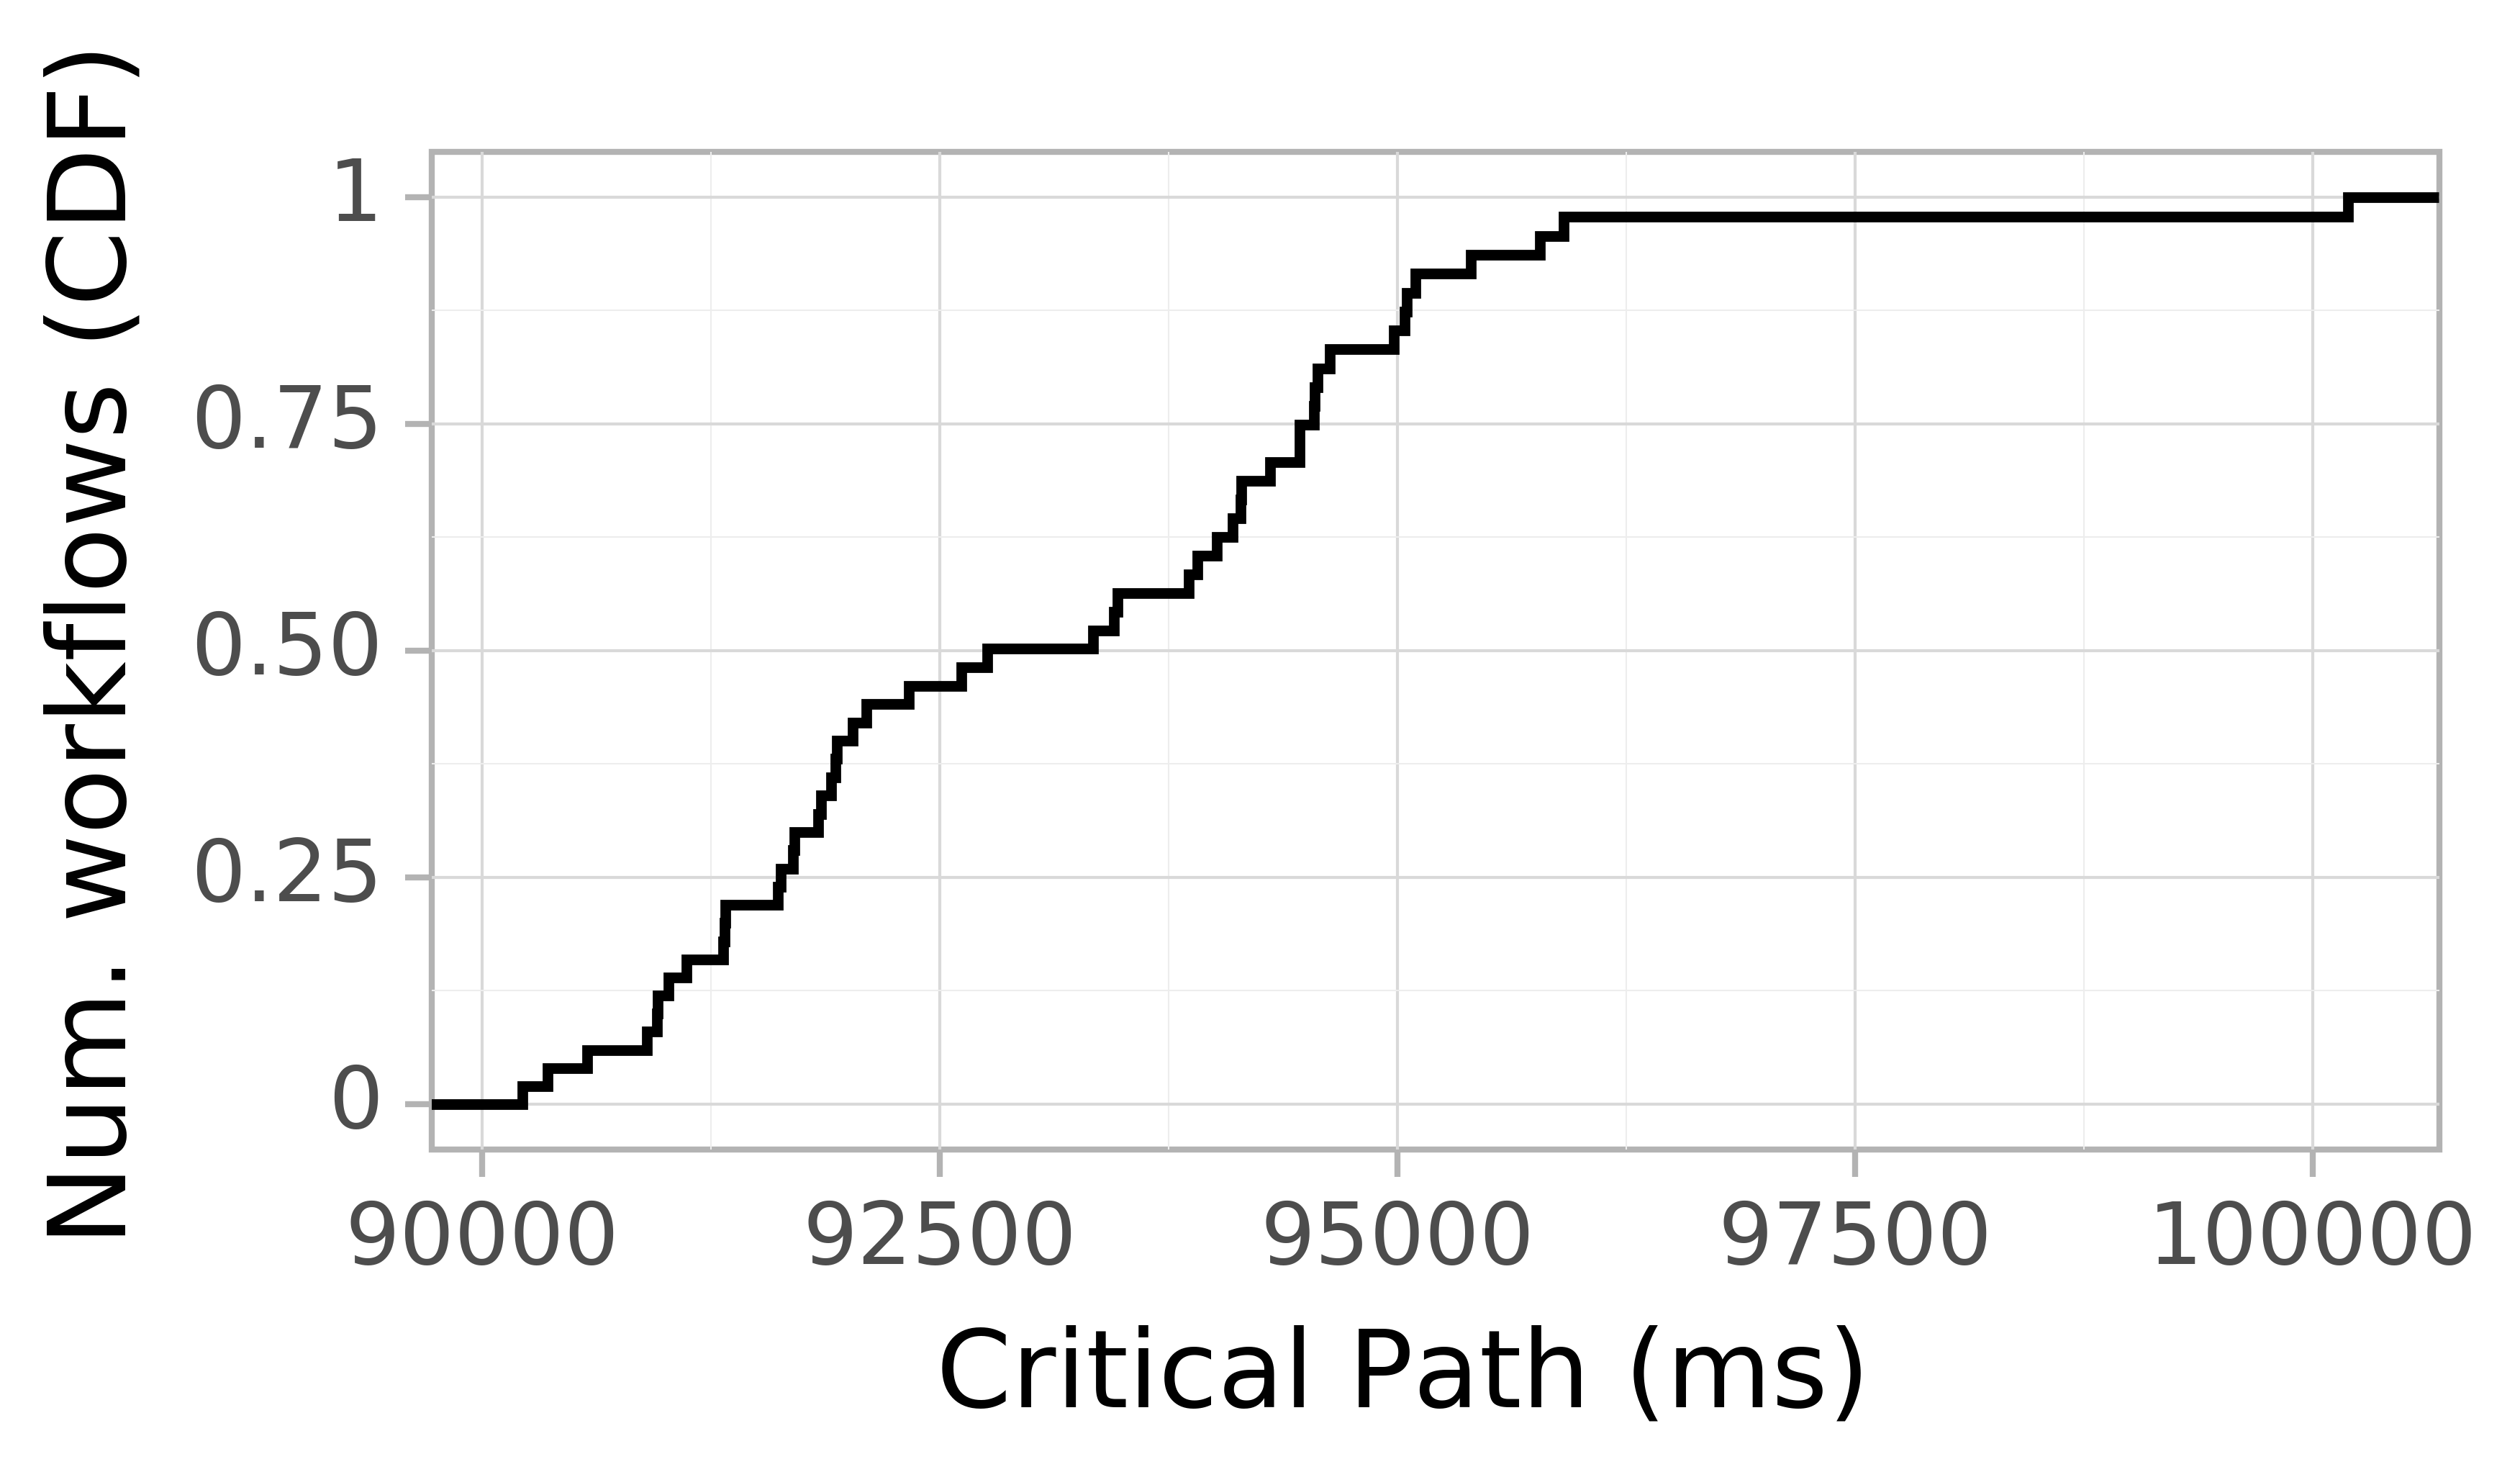 Job runtime CDF graph for the askalon-new_ee41 trace.